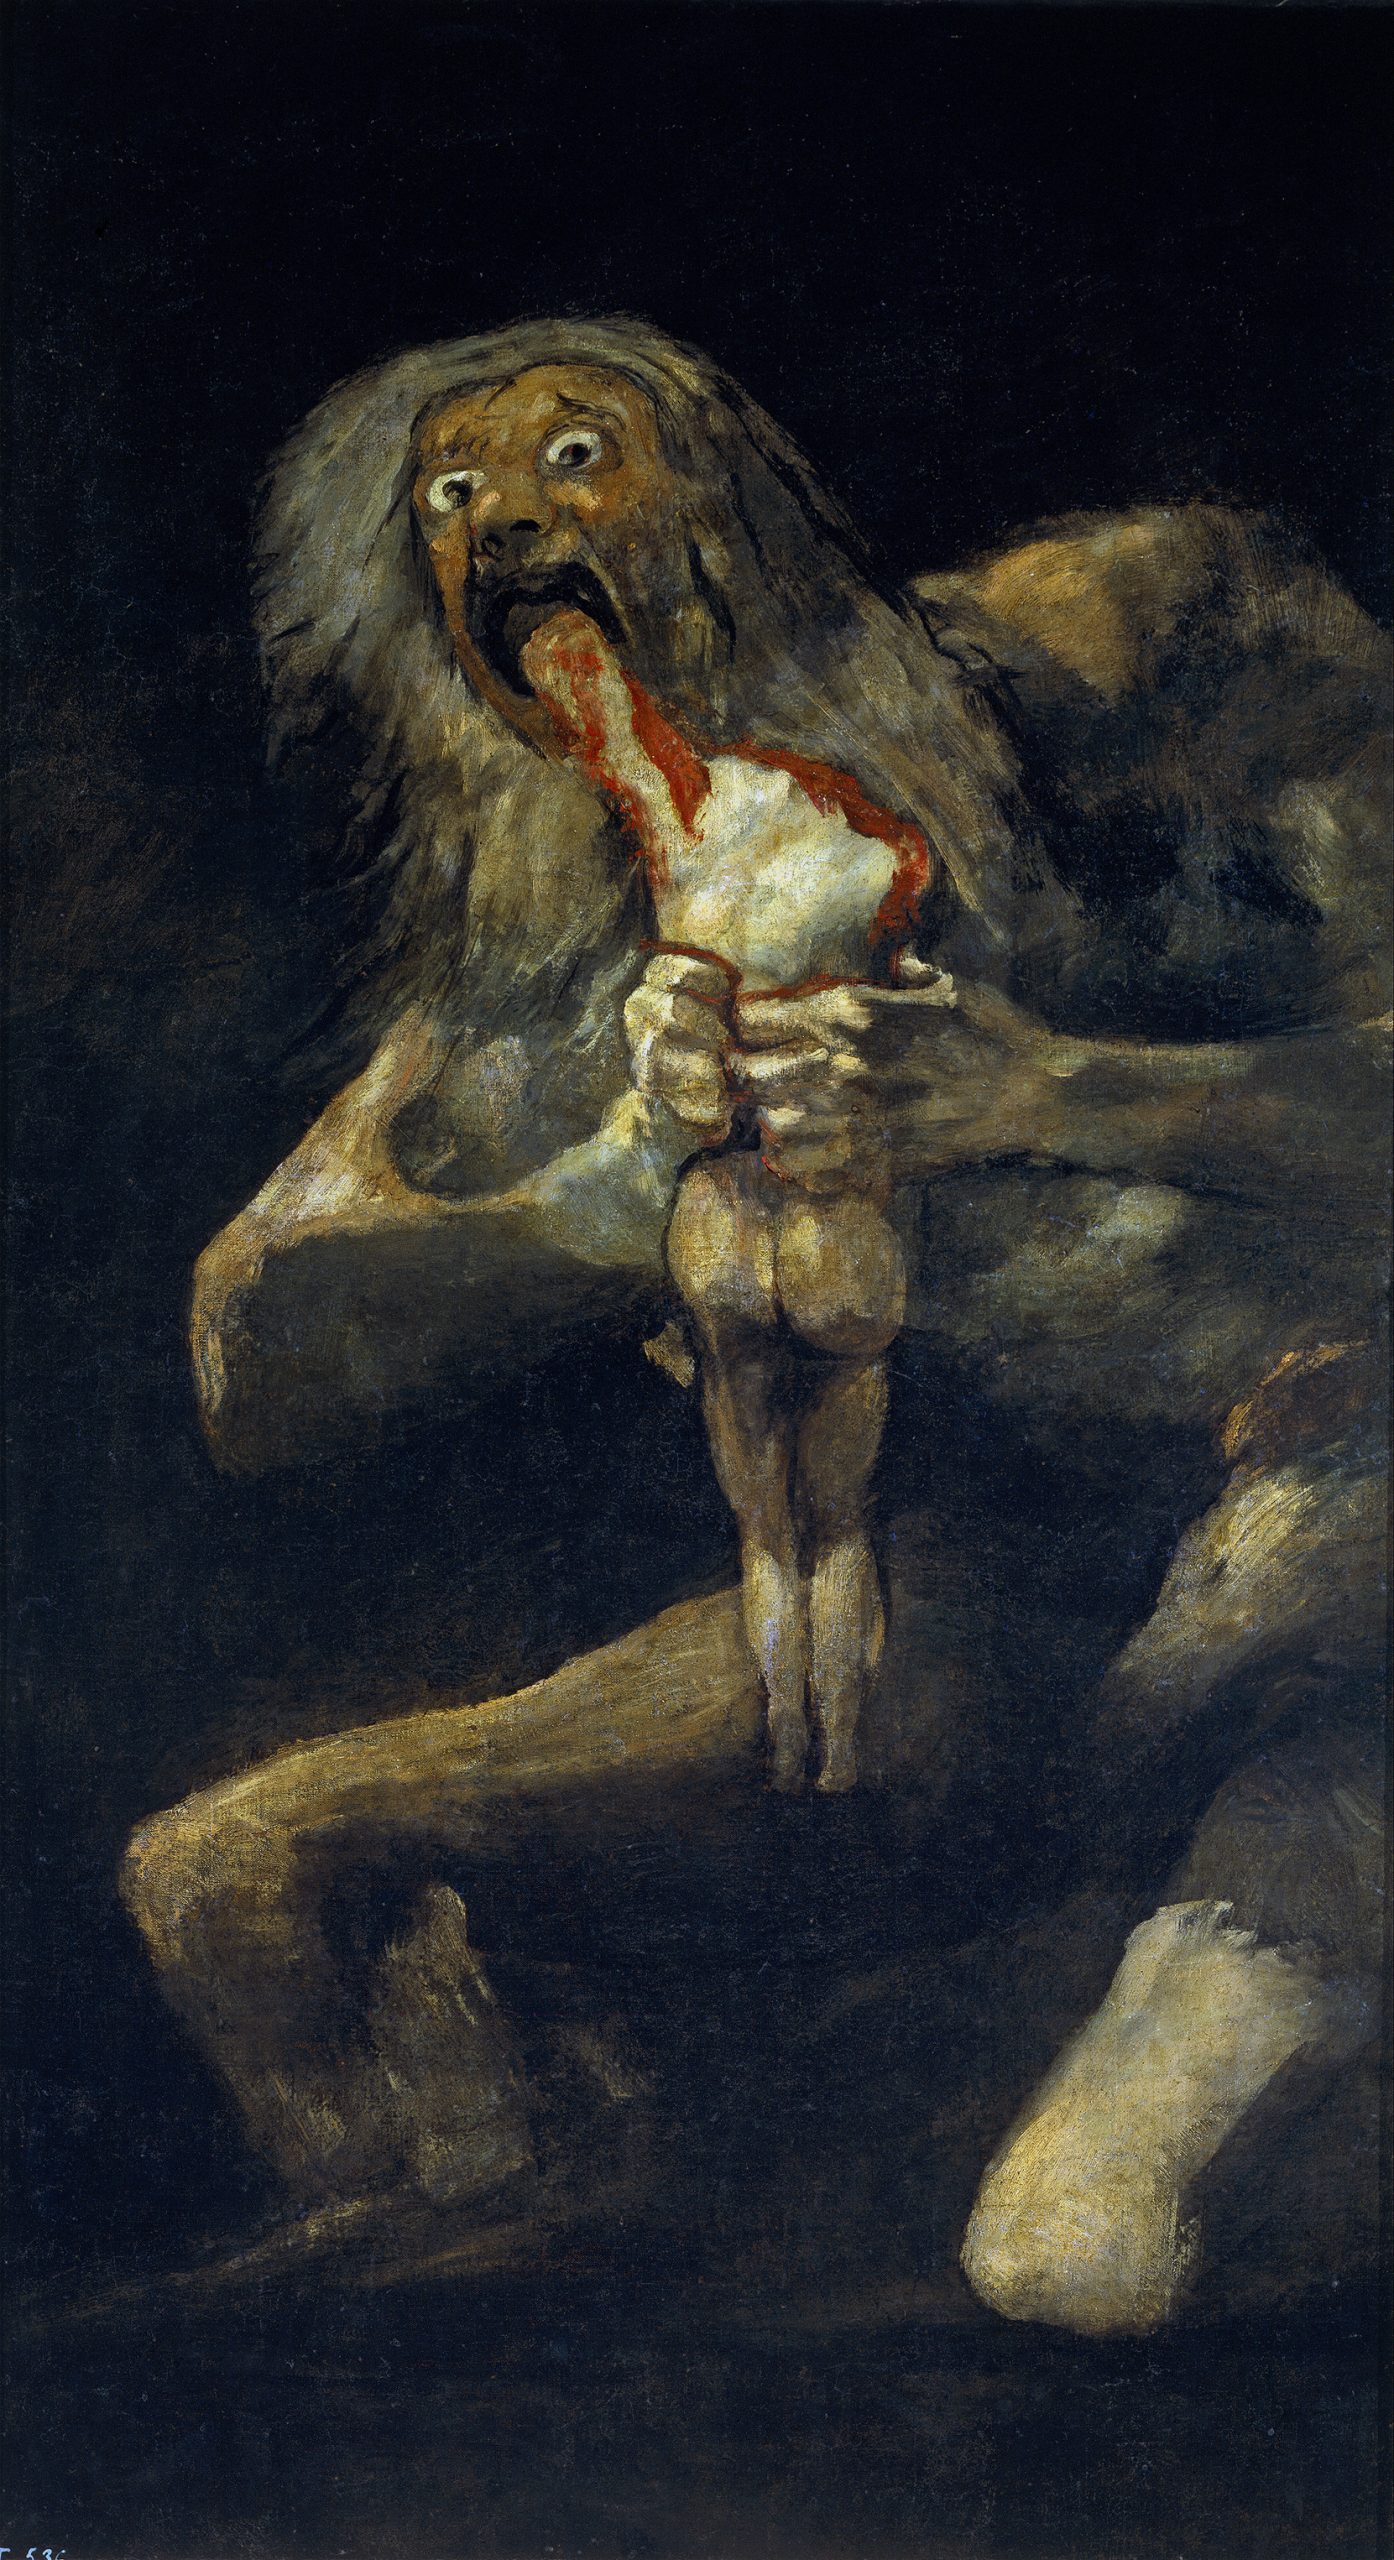 A gruesome painting of a naked, mythical giant eating a human figure.